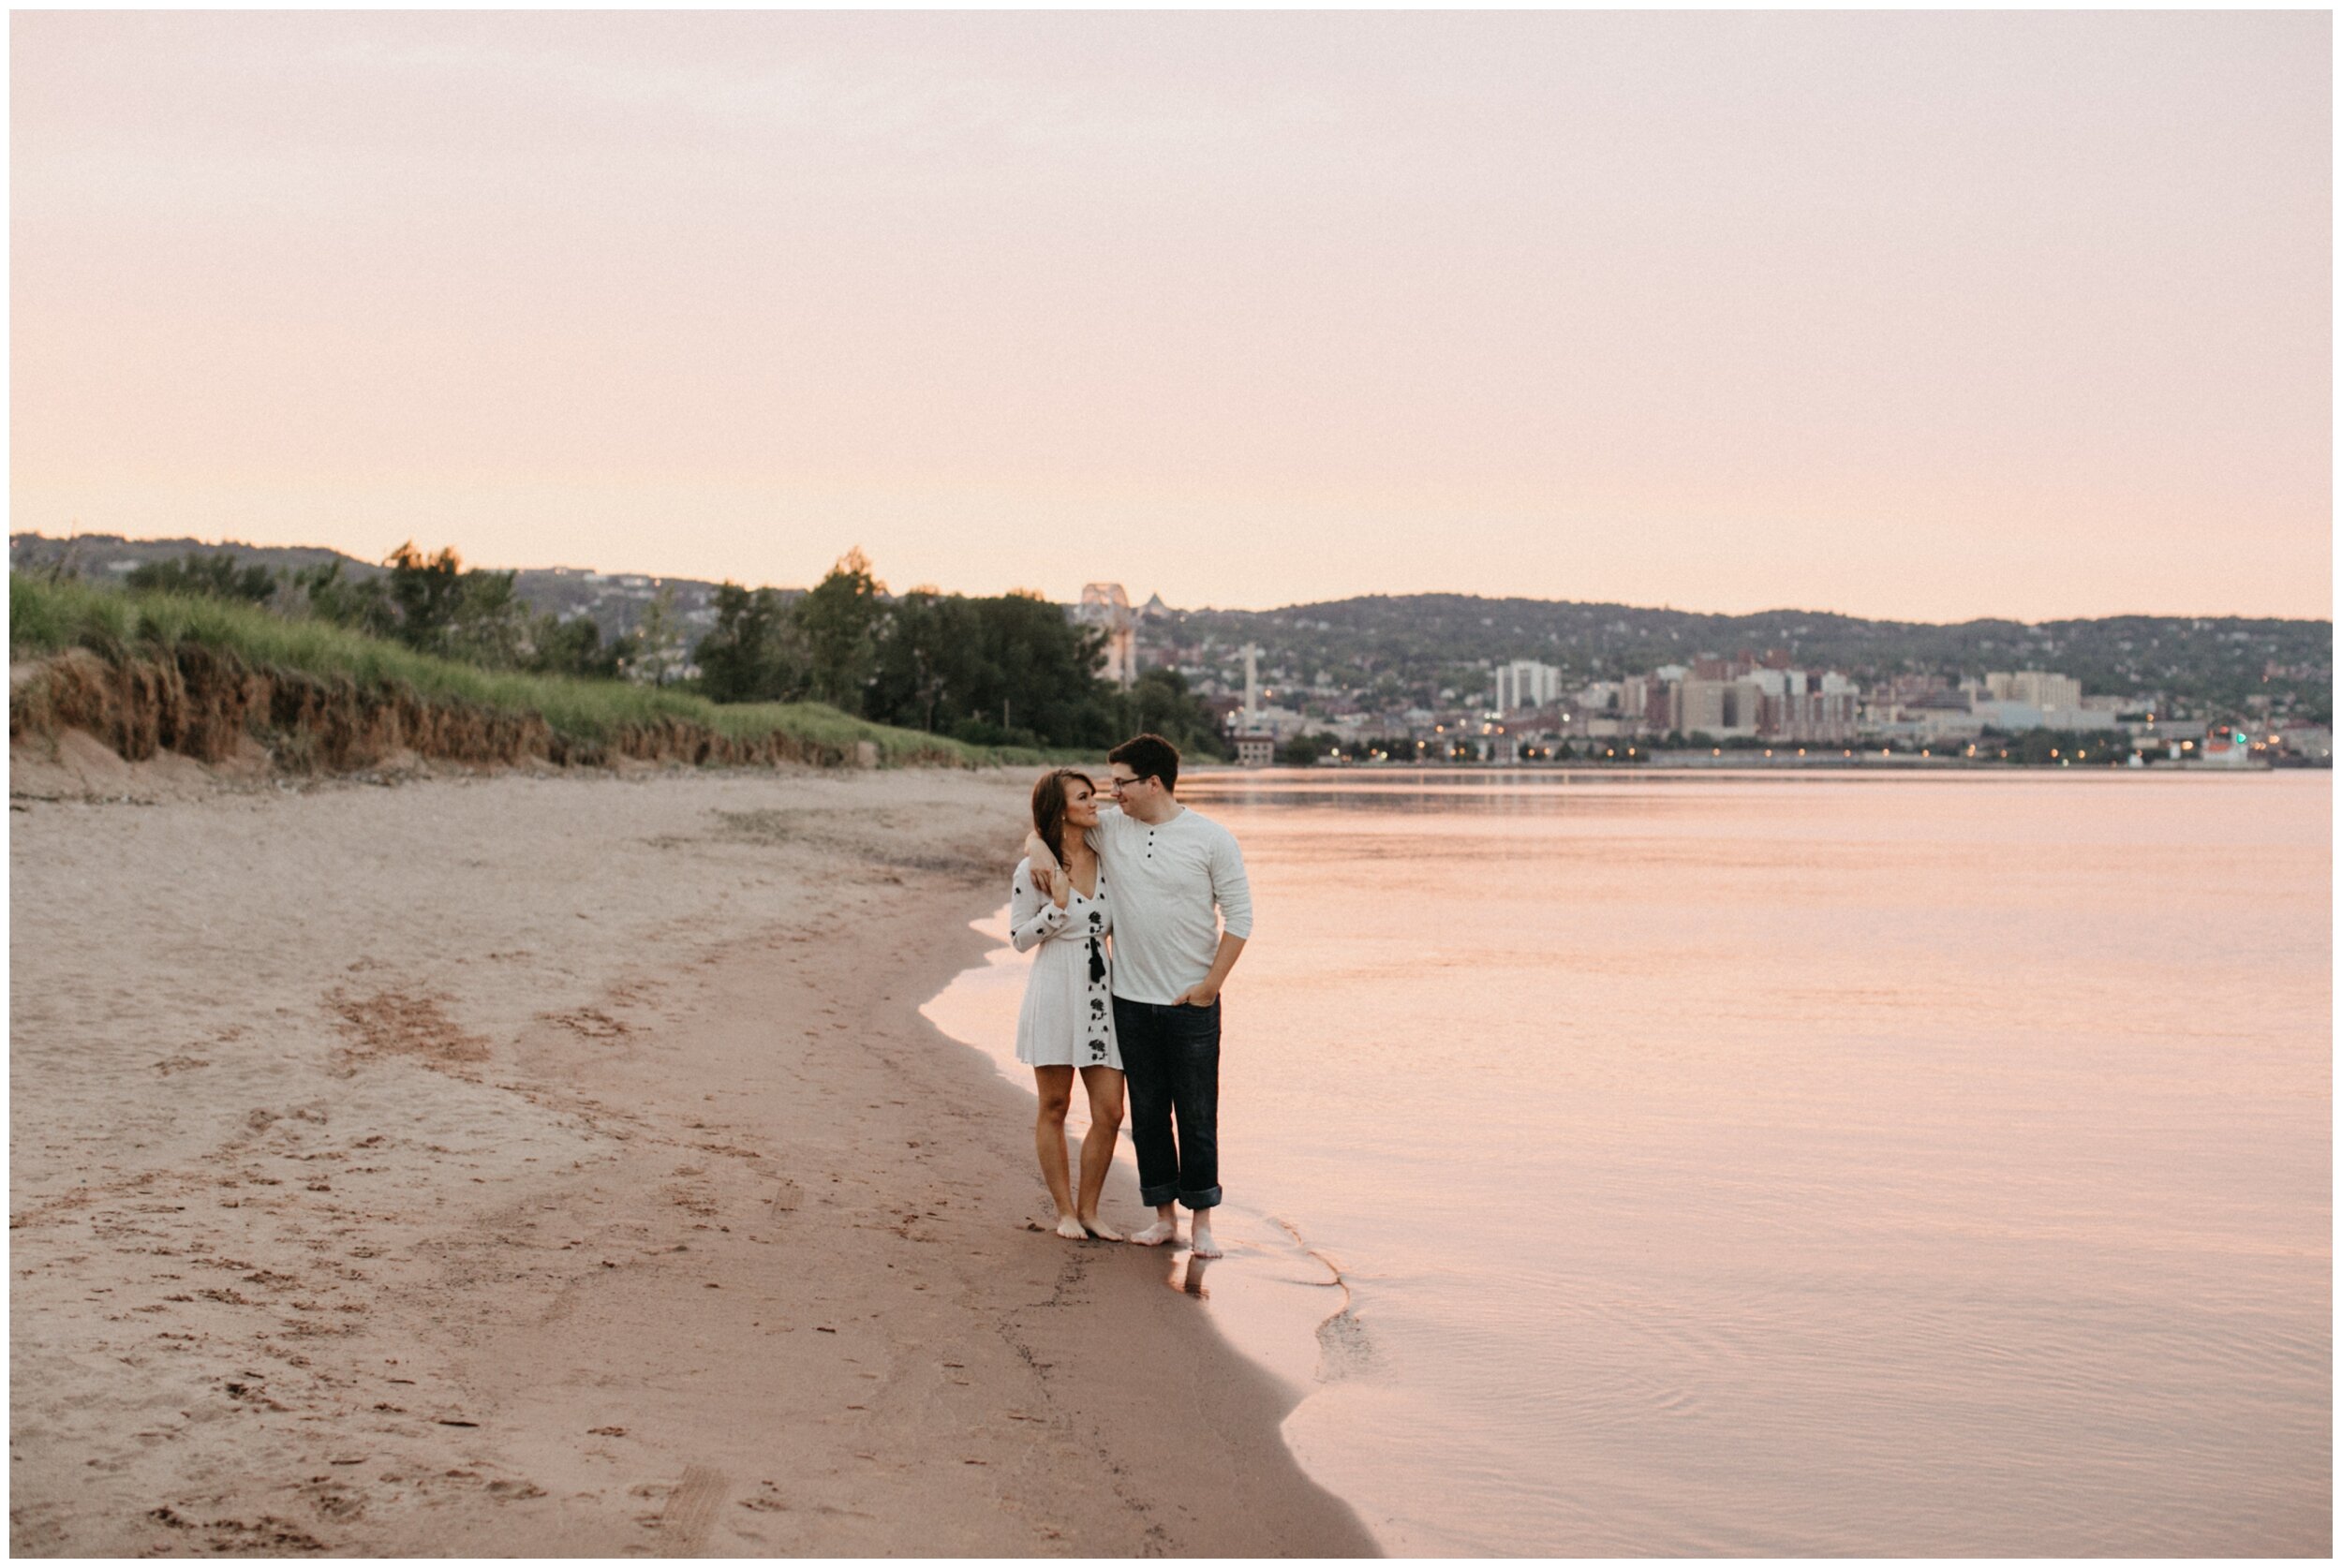 Couple walking on sandy beach during sunset engagement session in Duluth, Minnesota